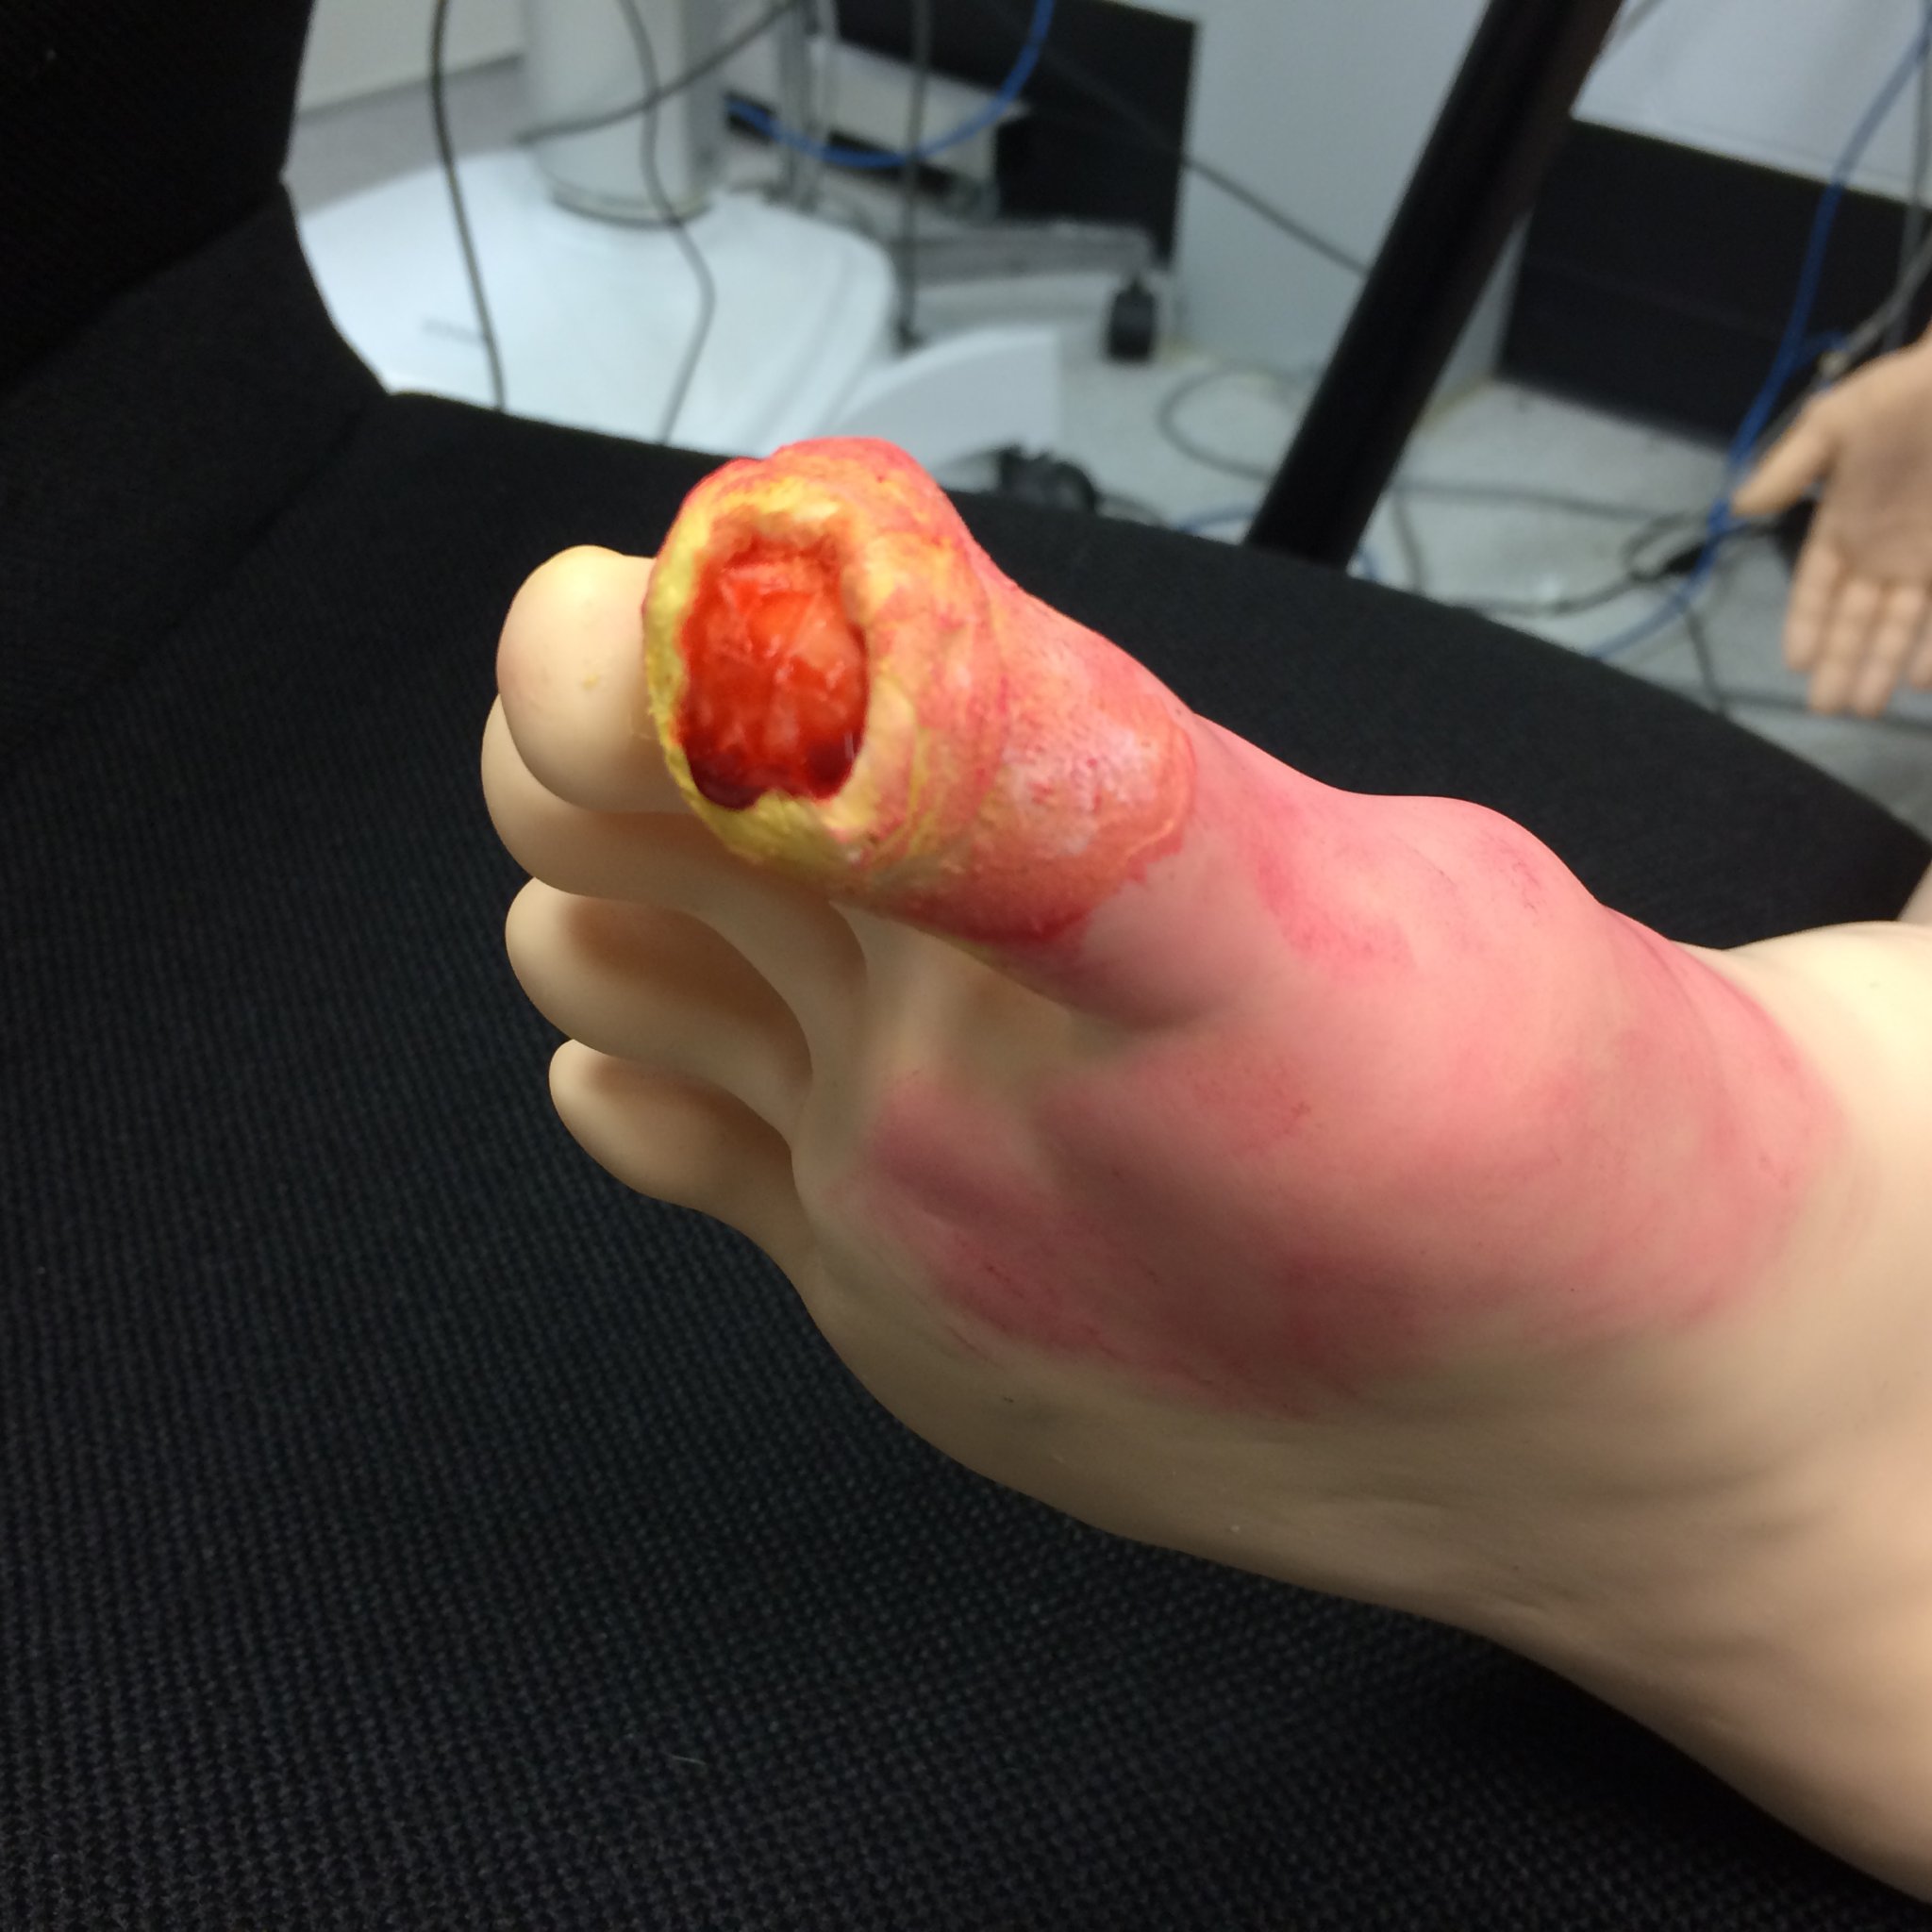 A mock toe injury, close up to show detail. 